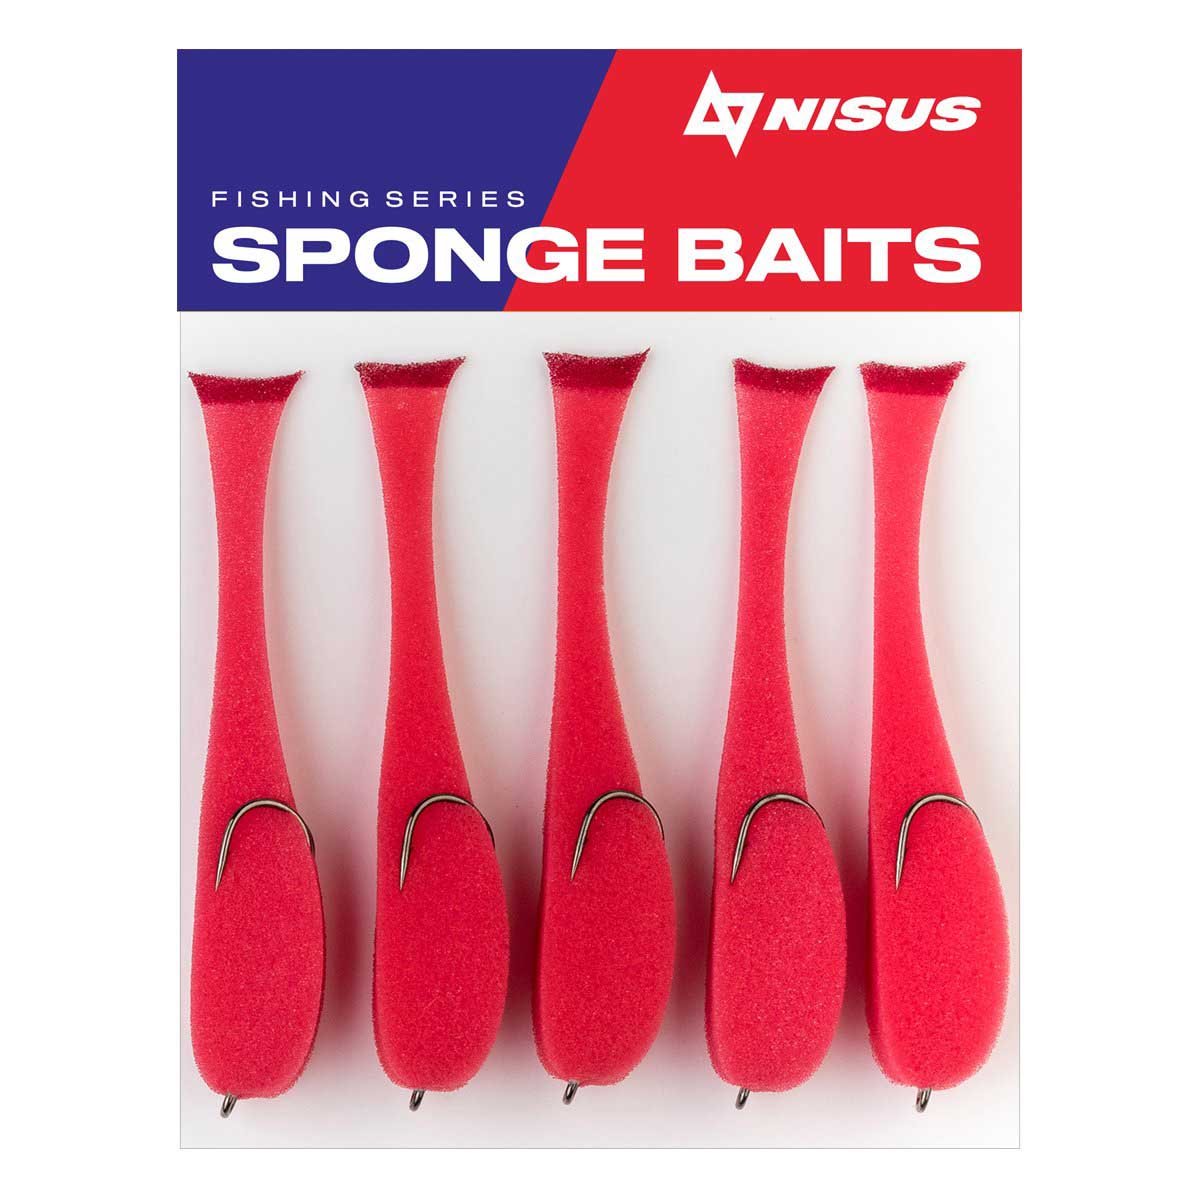 5.5" Sponge Bait with a Double Hook for Predatory Fish, Multi-Colored, 5 pcs